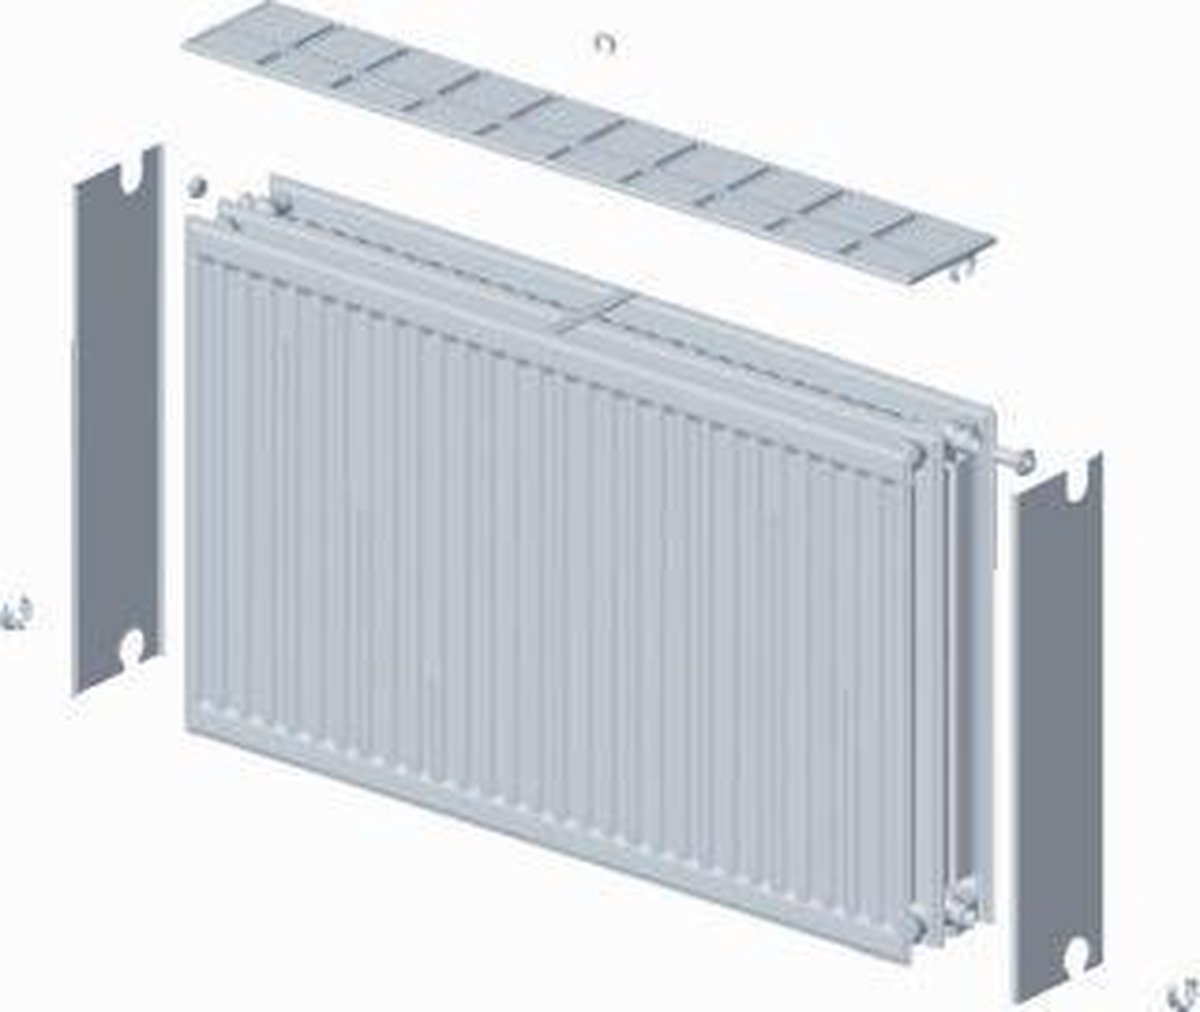 Stelrad paneelradiator Novello, staal, wit, (hxlxd) 500x1200x158mm, 33